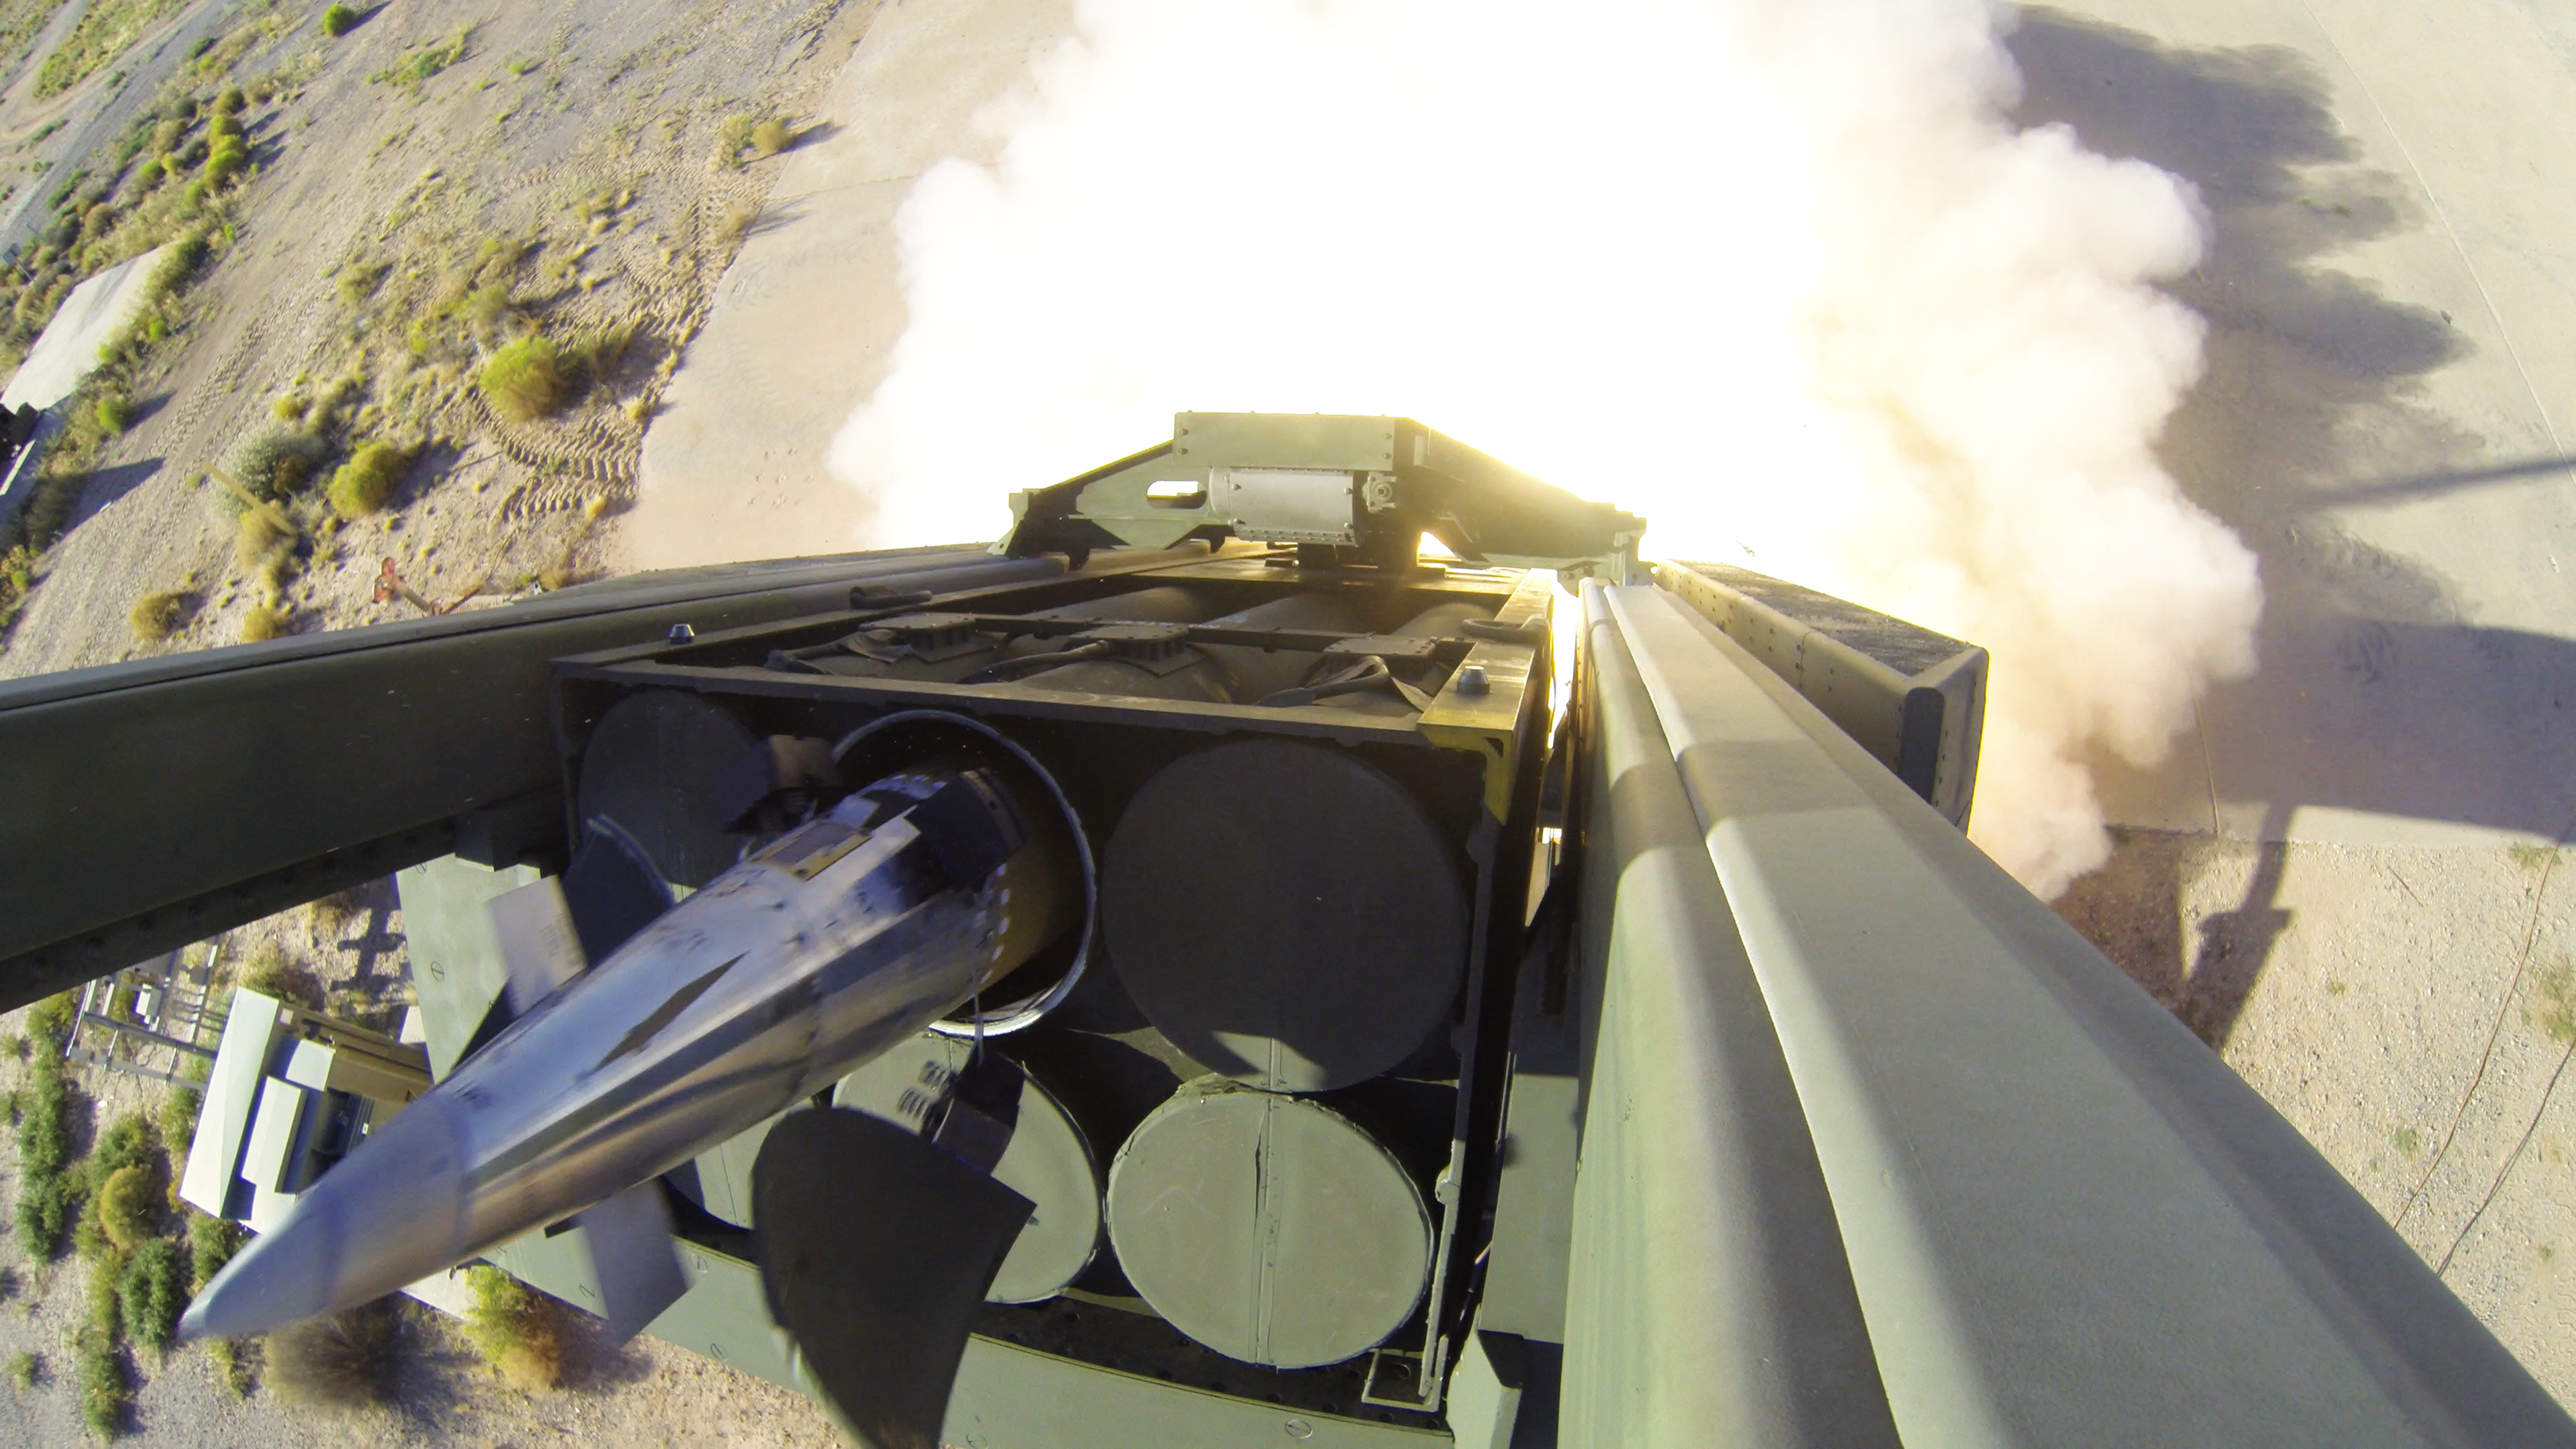 Lockheed Martin-built HIMARS launcher fires a GMLRS rocket during a test at White Sands Missile Range, New Mexico.